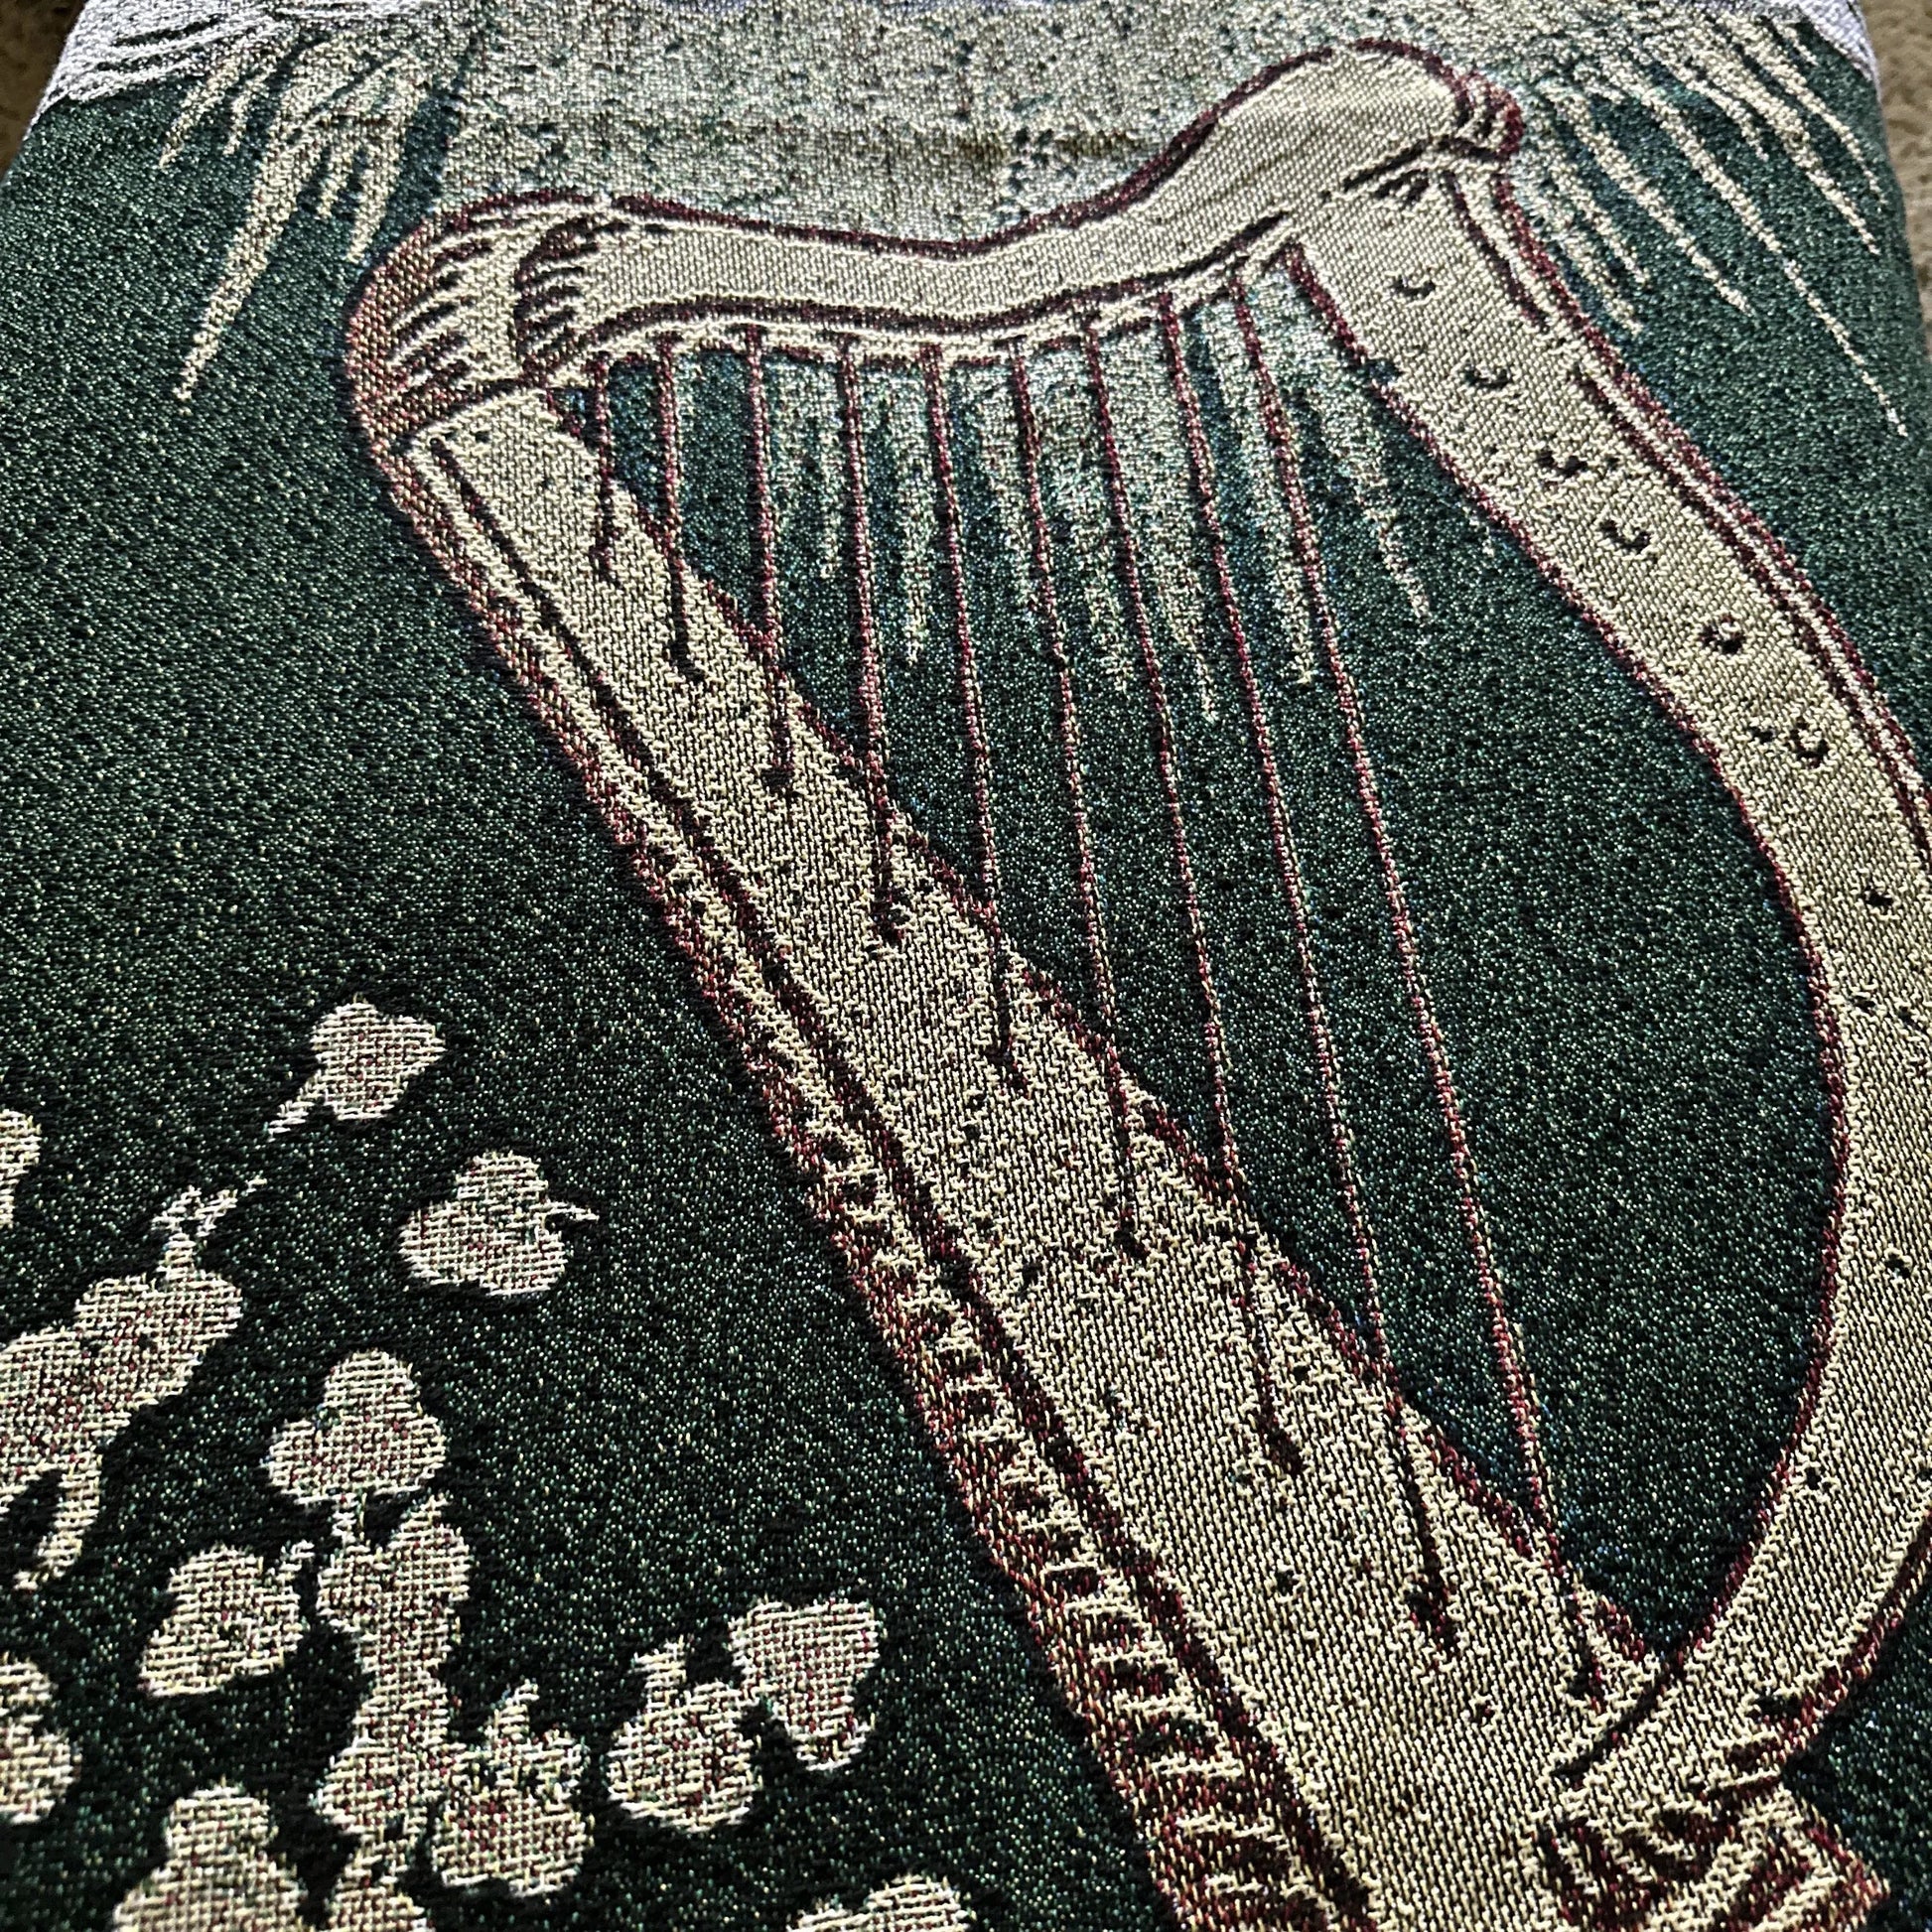 Close-up of the harp on The Civil War "Irish Brigade" blanket woven in the US from The History List store